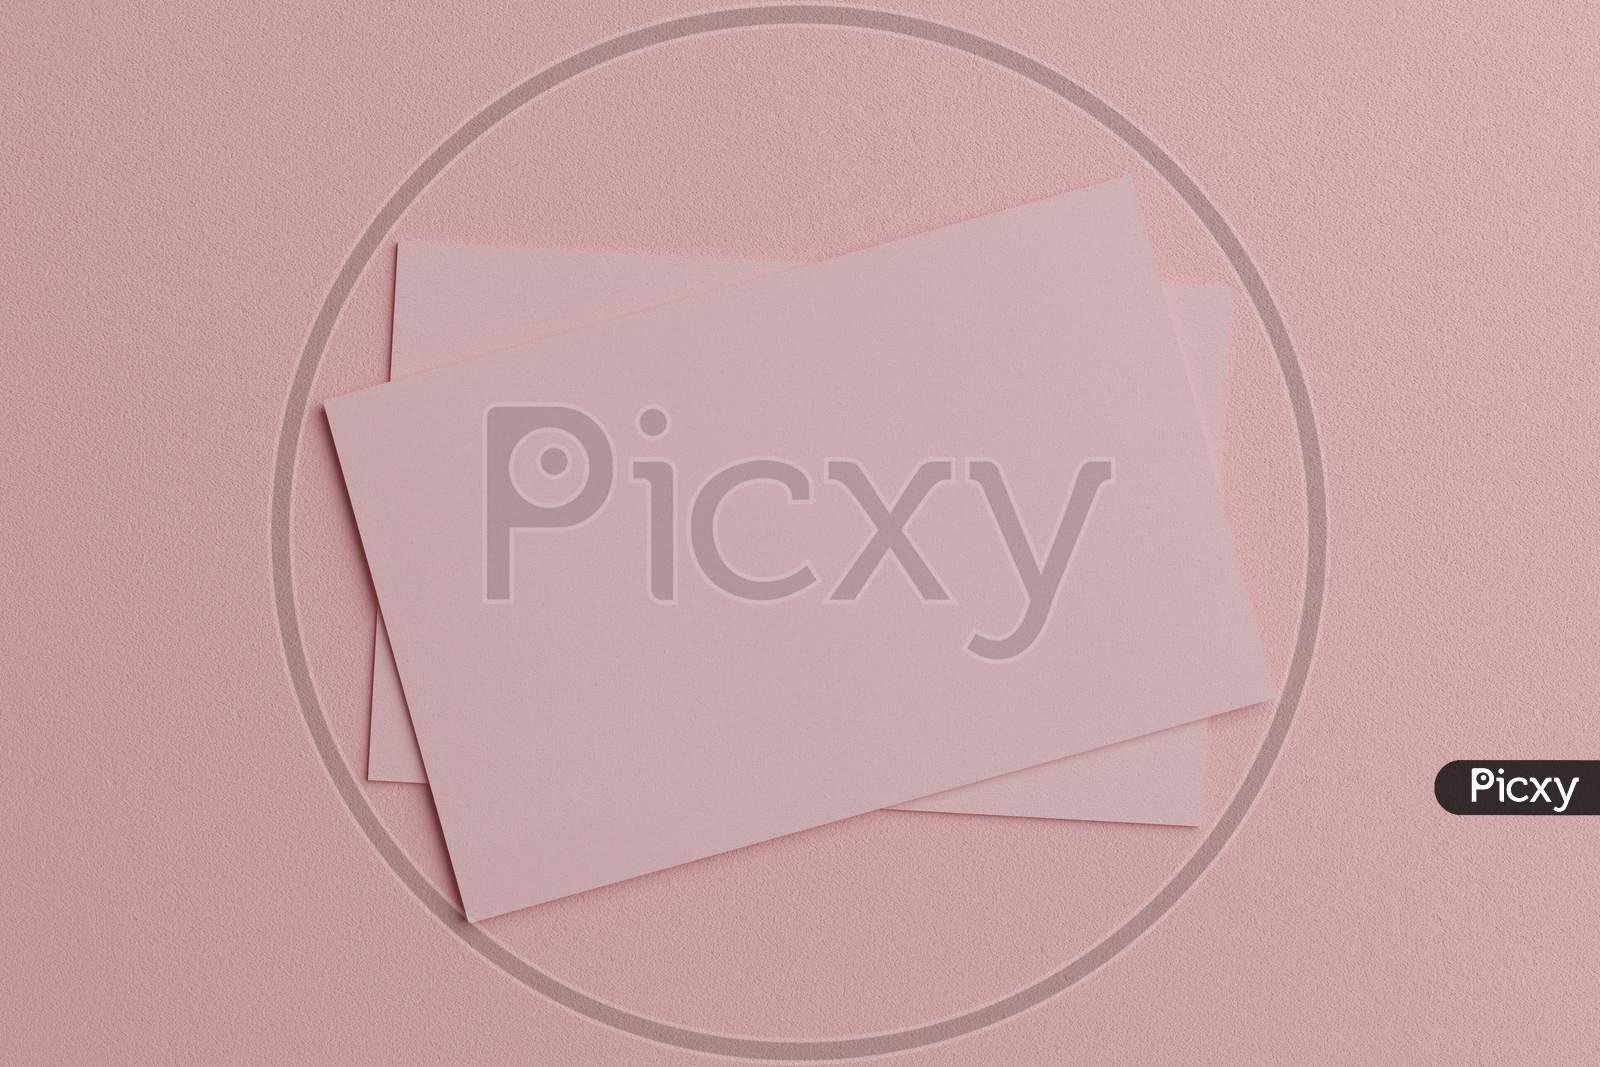 Pink Pastel Business Card Paper Mockup Template With Blank Space Cover For Insert Company Logo Or Personal Identity On Cardboard Background. Modern Style Concept. Top View. 3D Illustration Render